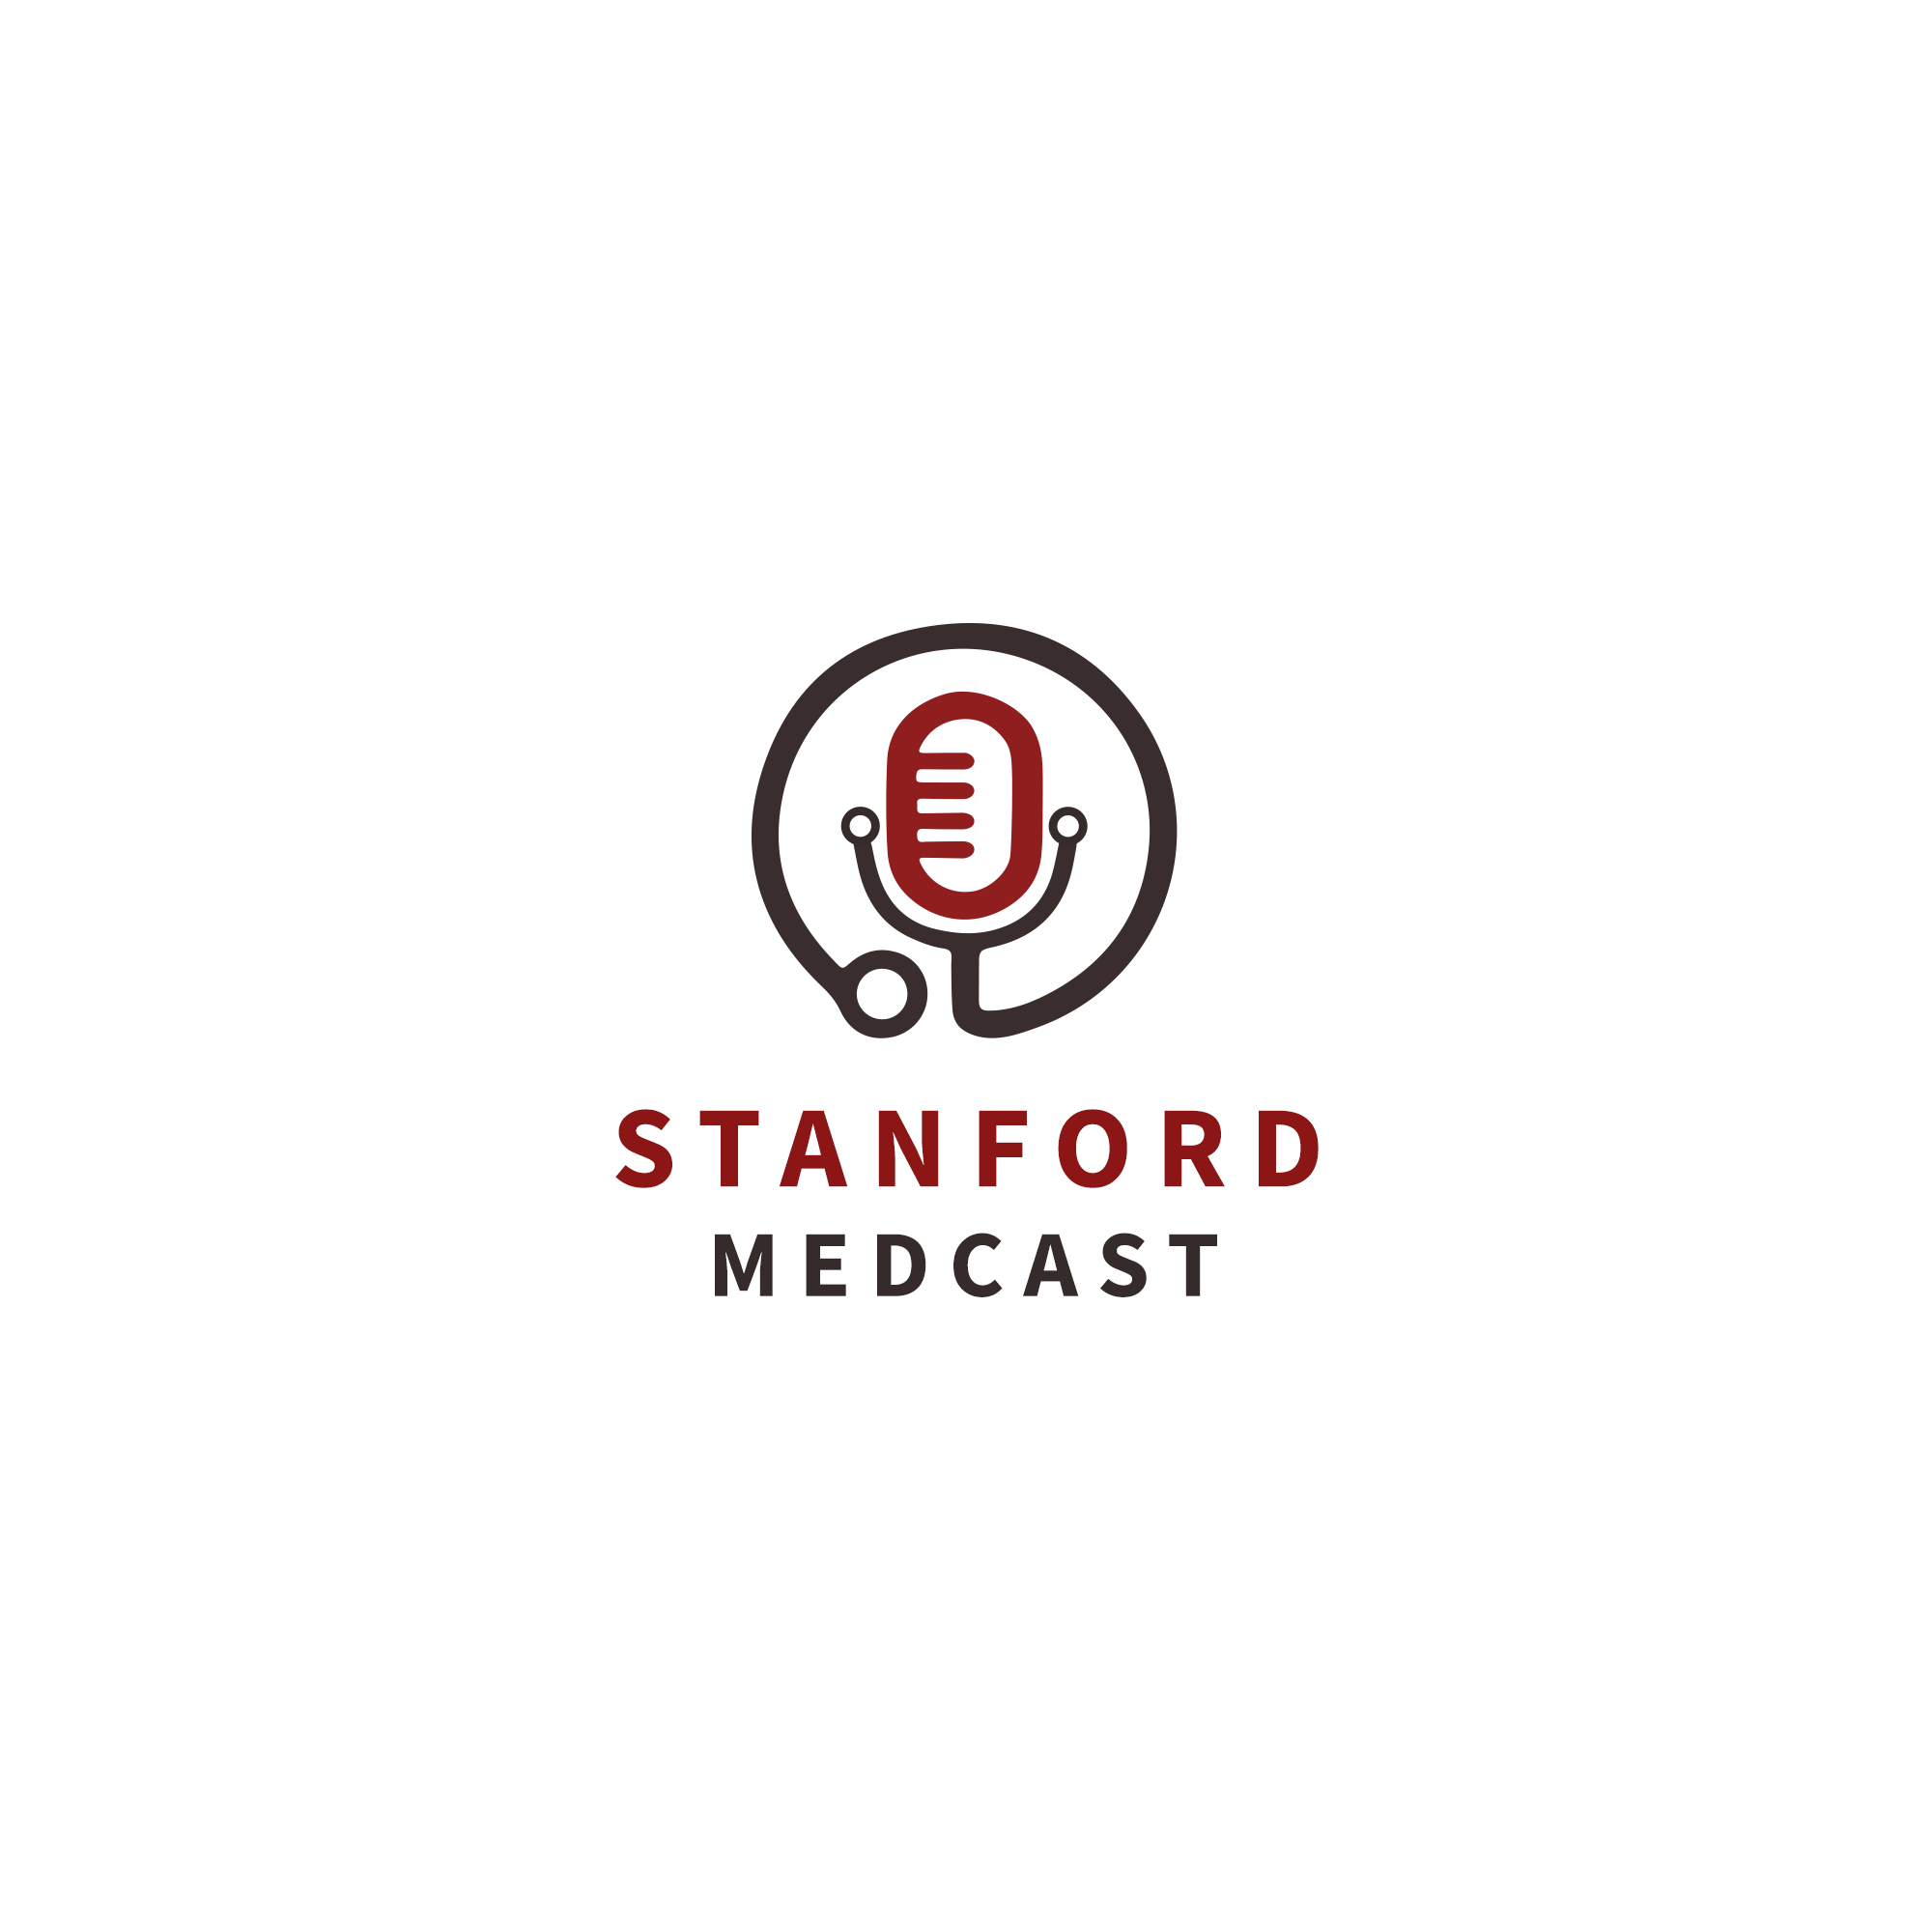 Stanford Medcast Episode 62: Hot Topics Mini-Series - What